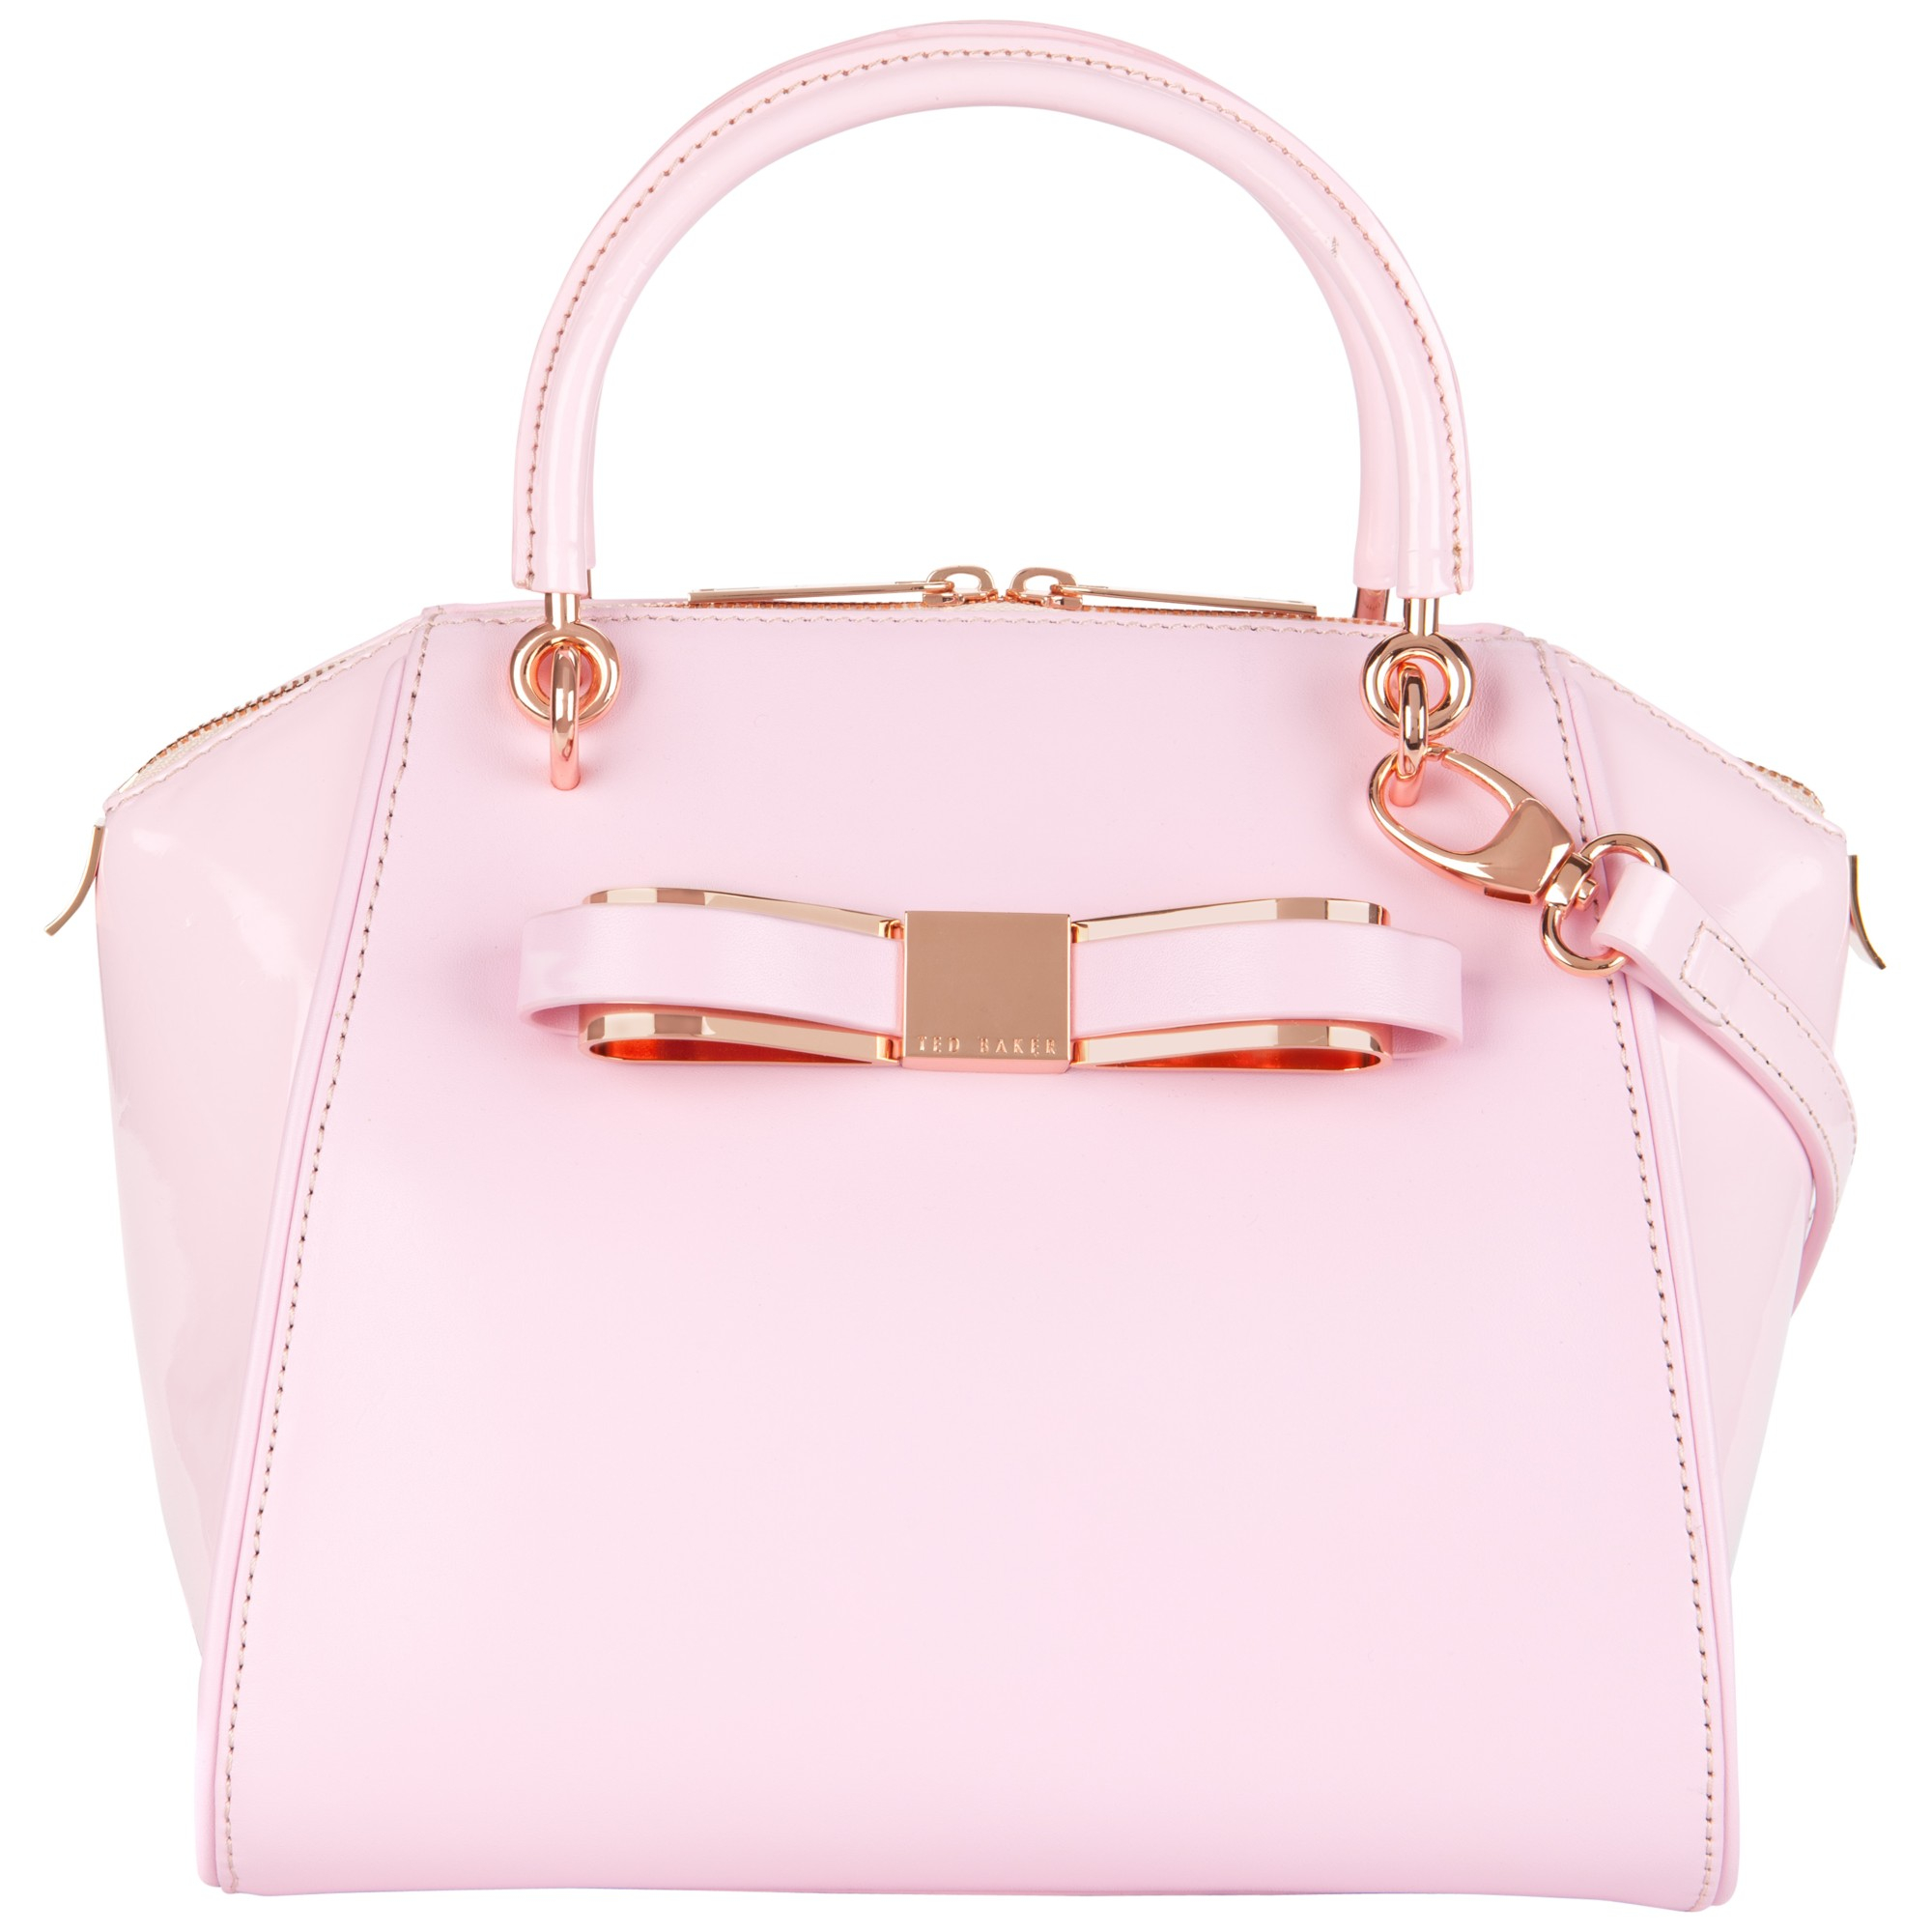 Ted Baker Aveline Patent-Leather Tote in Pink - Lyst